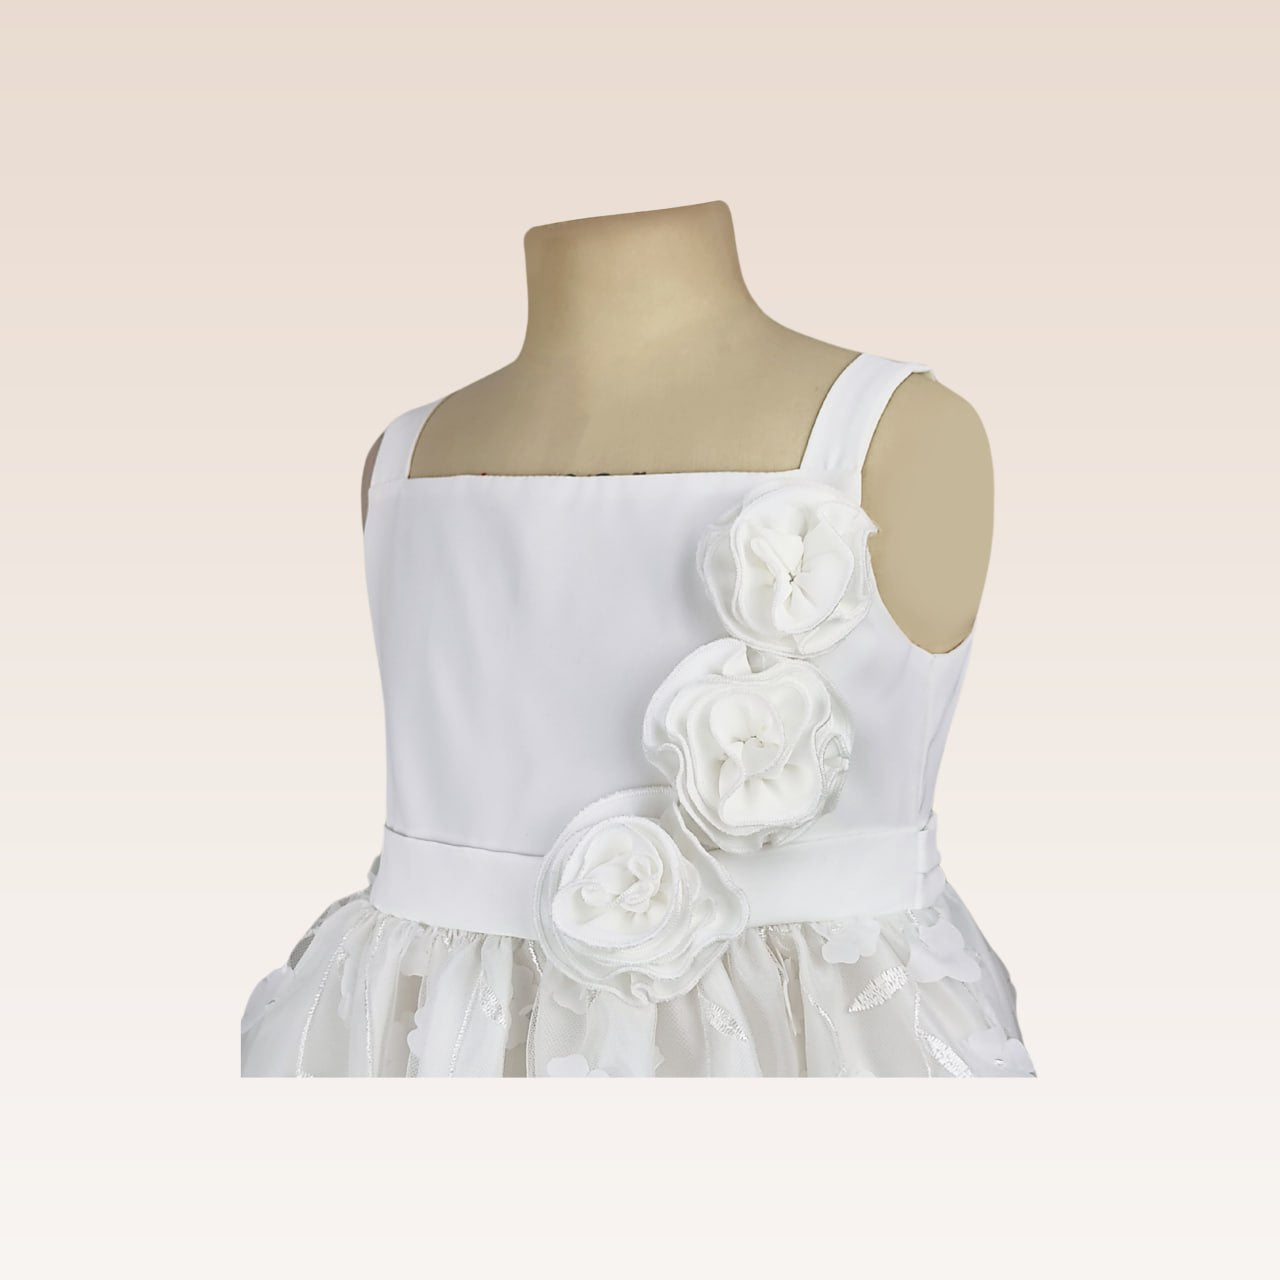 Gretel Girls Ivory Party Dress with Bubble skirt in Floral Applique fabric